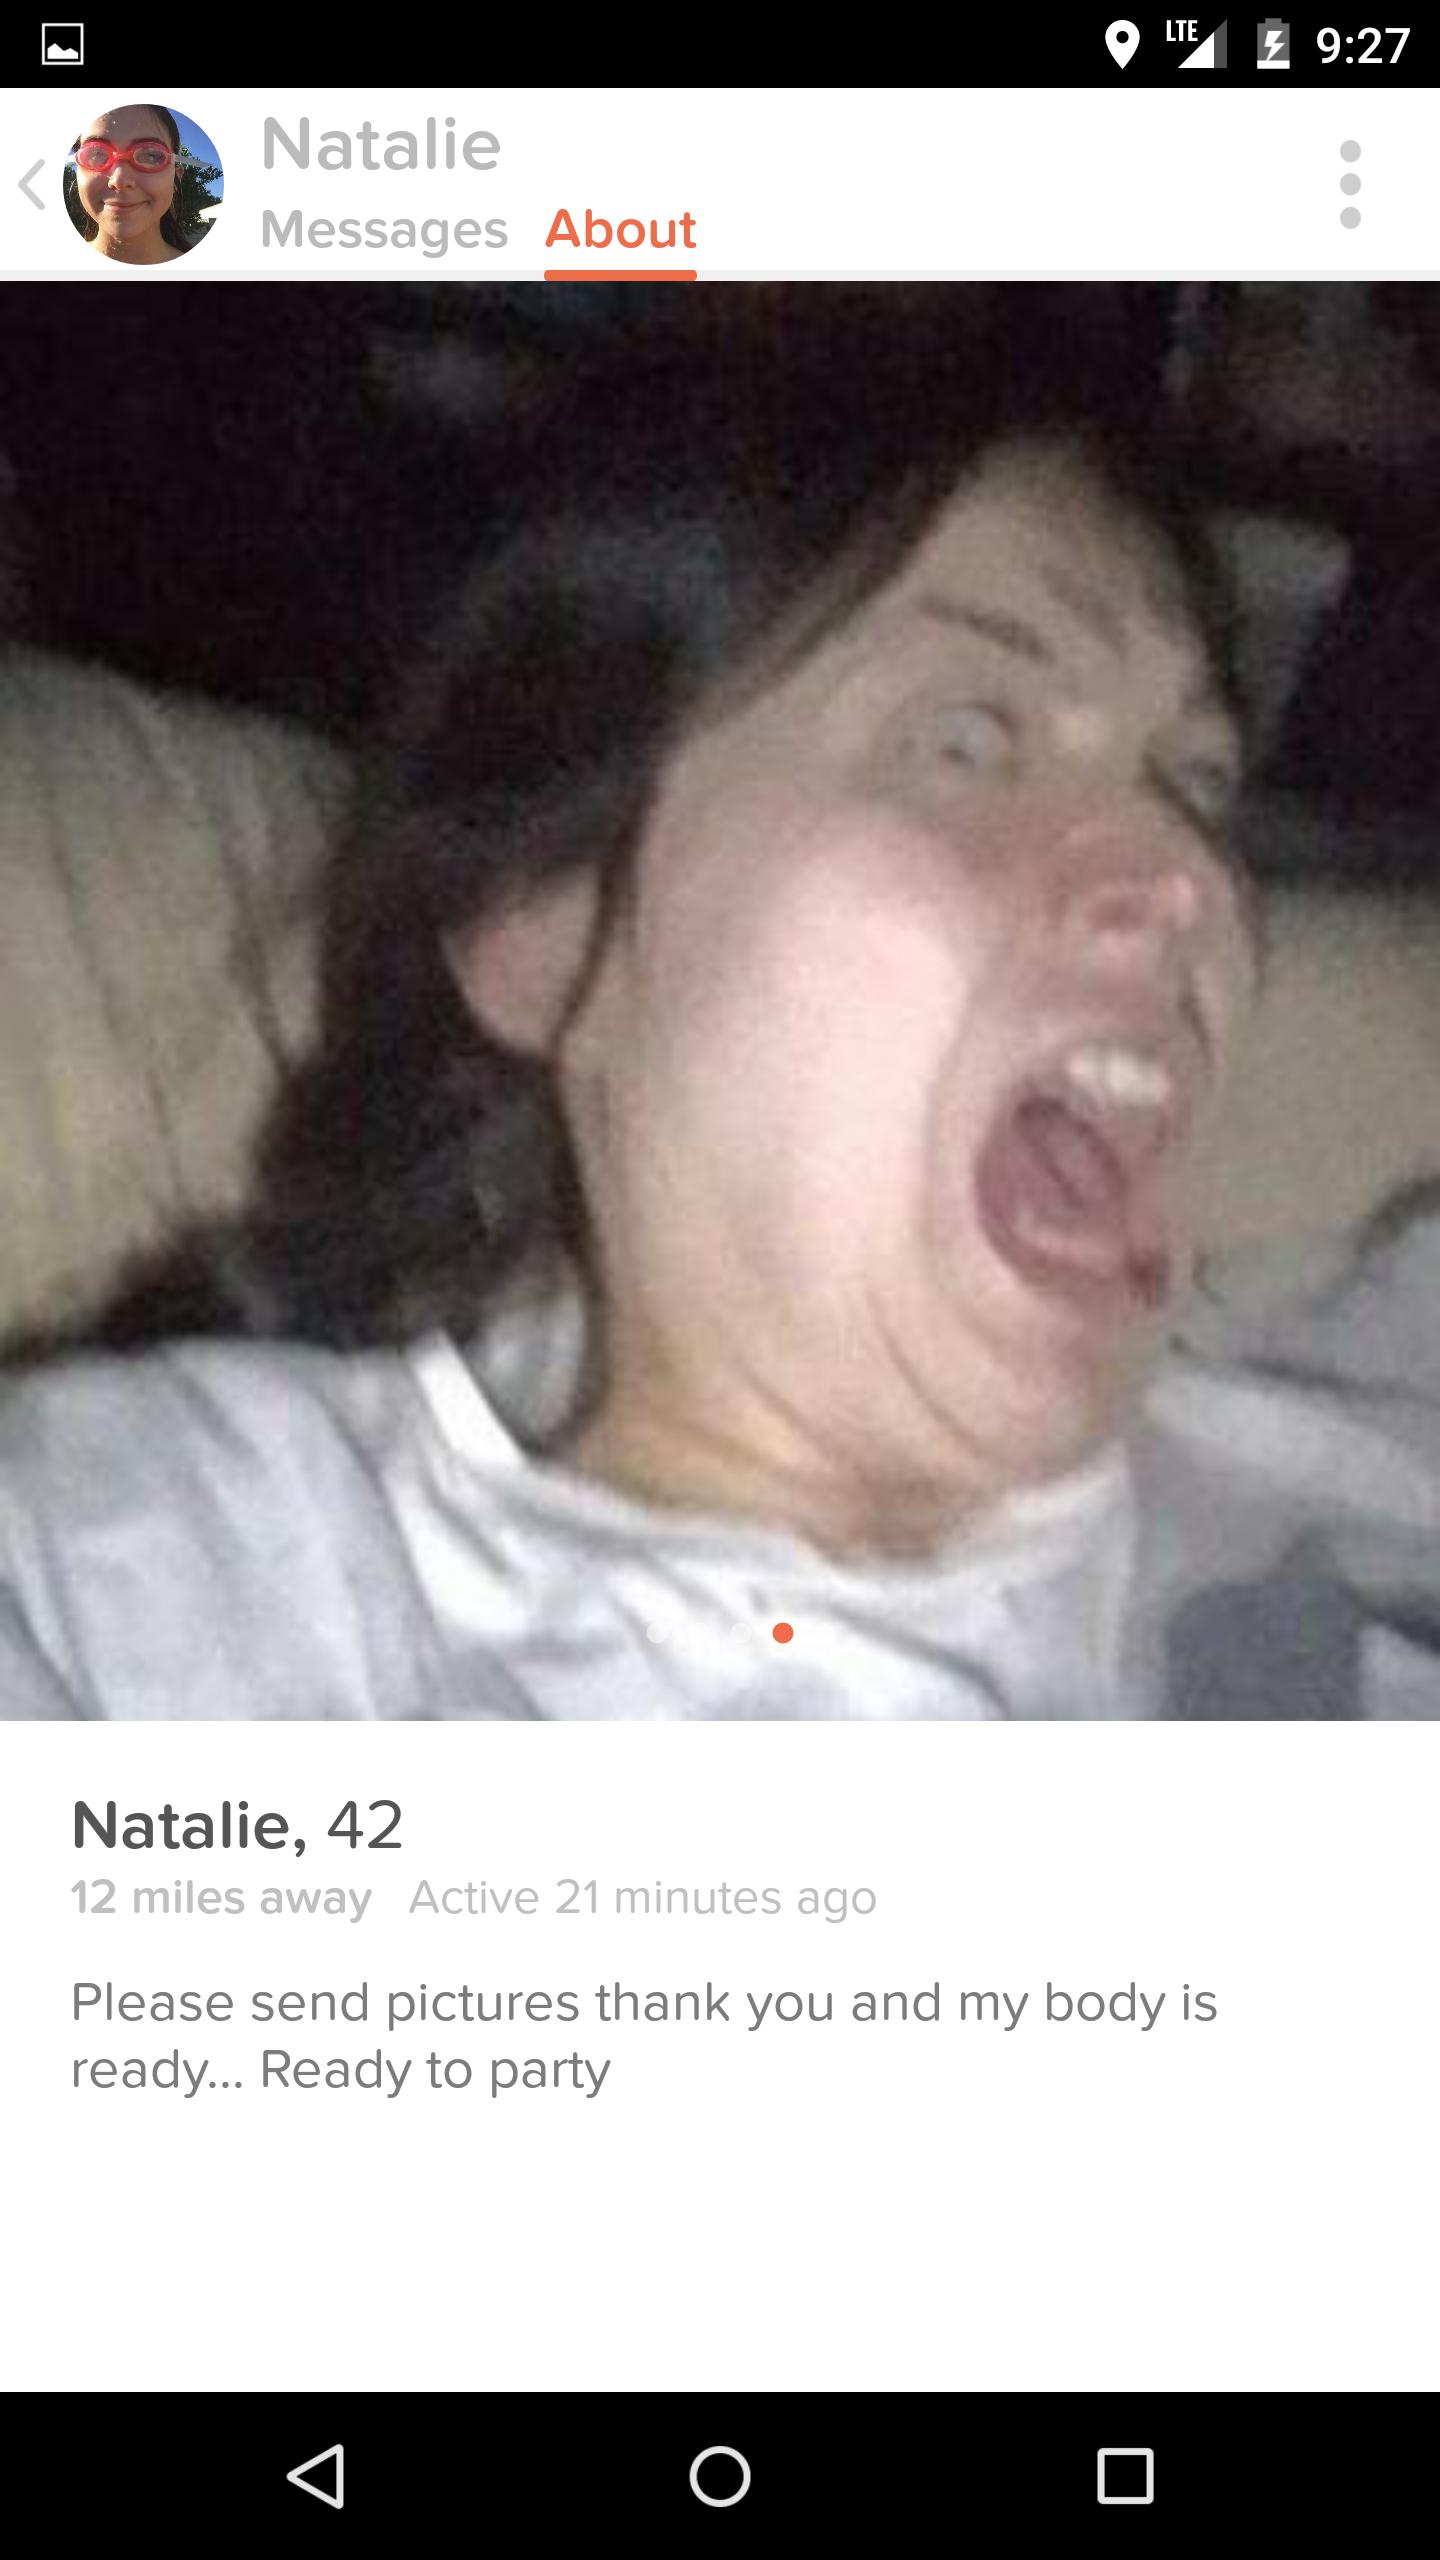 tinder - tinder scary - Ole E Lte Natalie Messages About Natalie, 42 12 miles away Active 21 minutes ago Please send pictures thank you and my body is ready... Ready to party